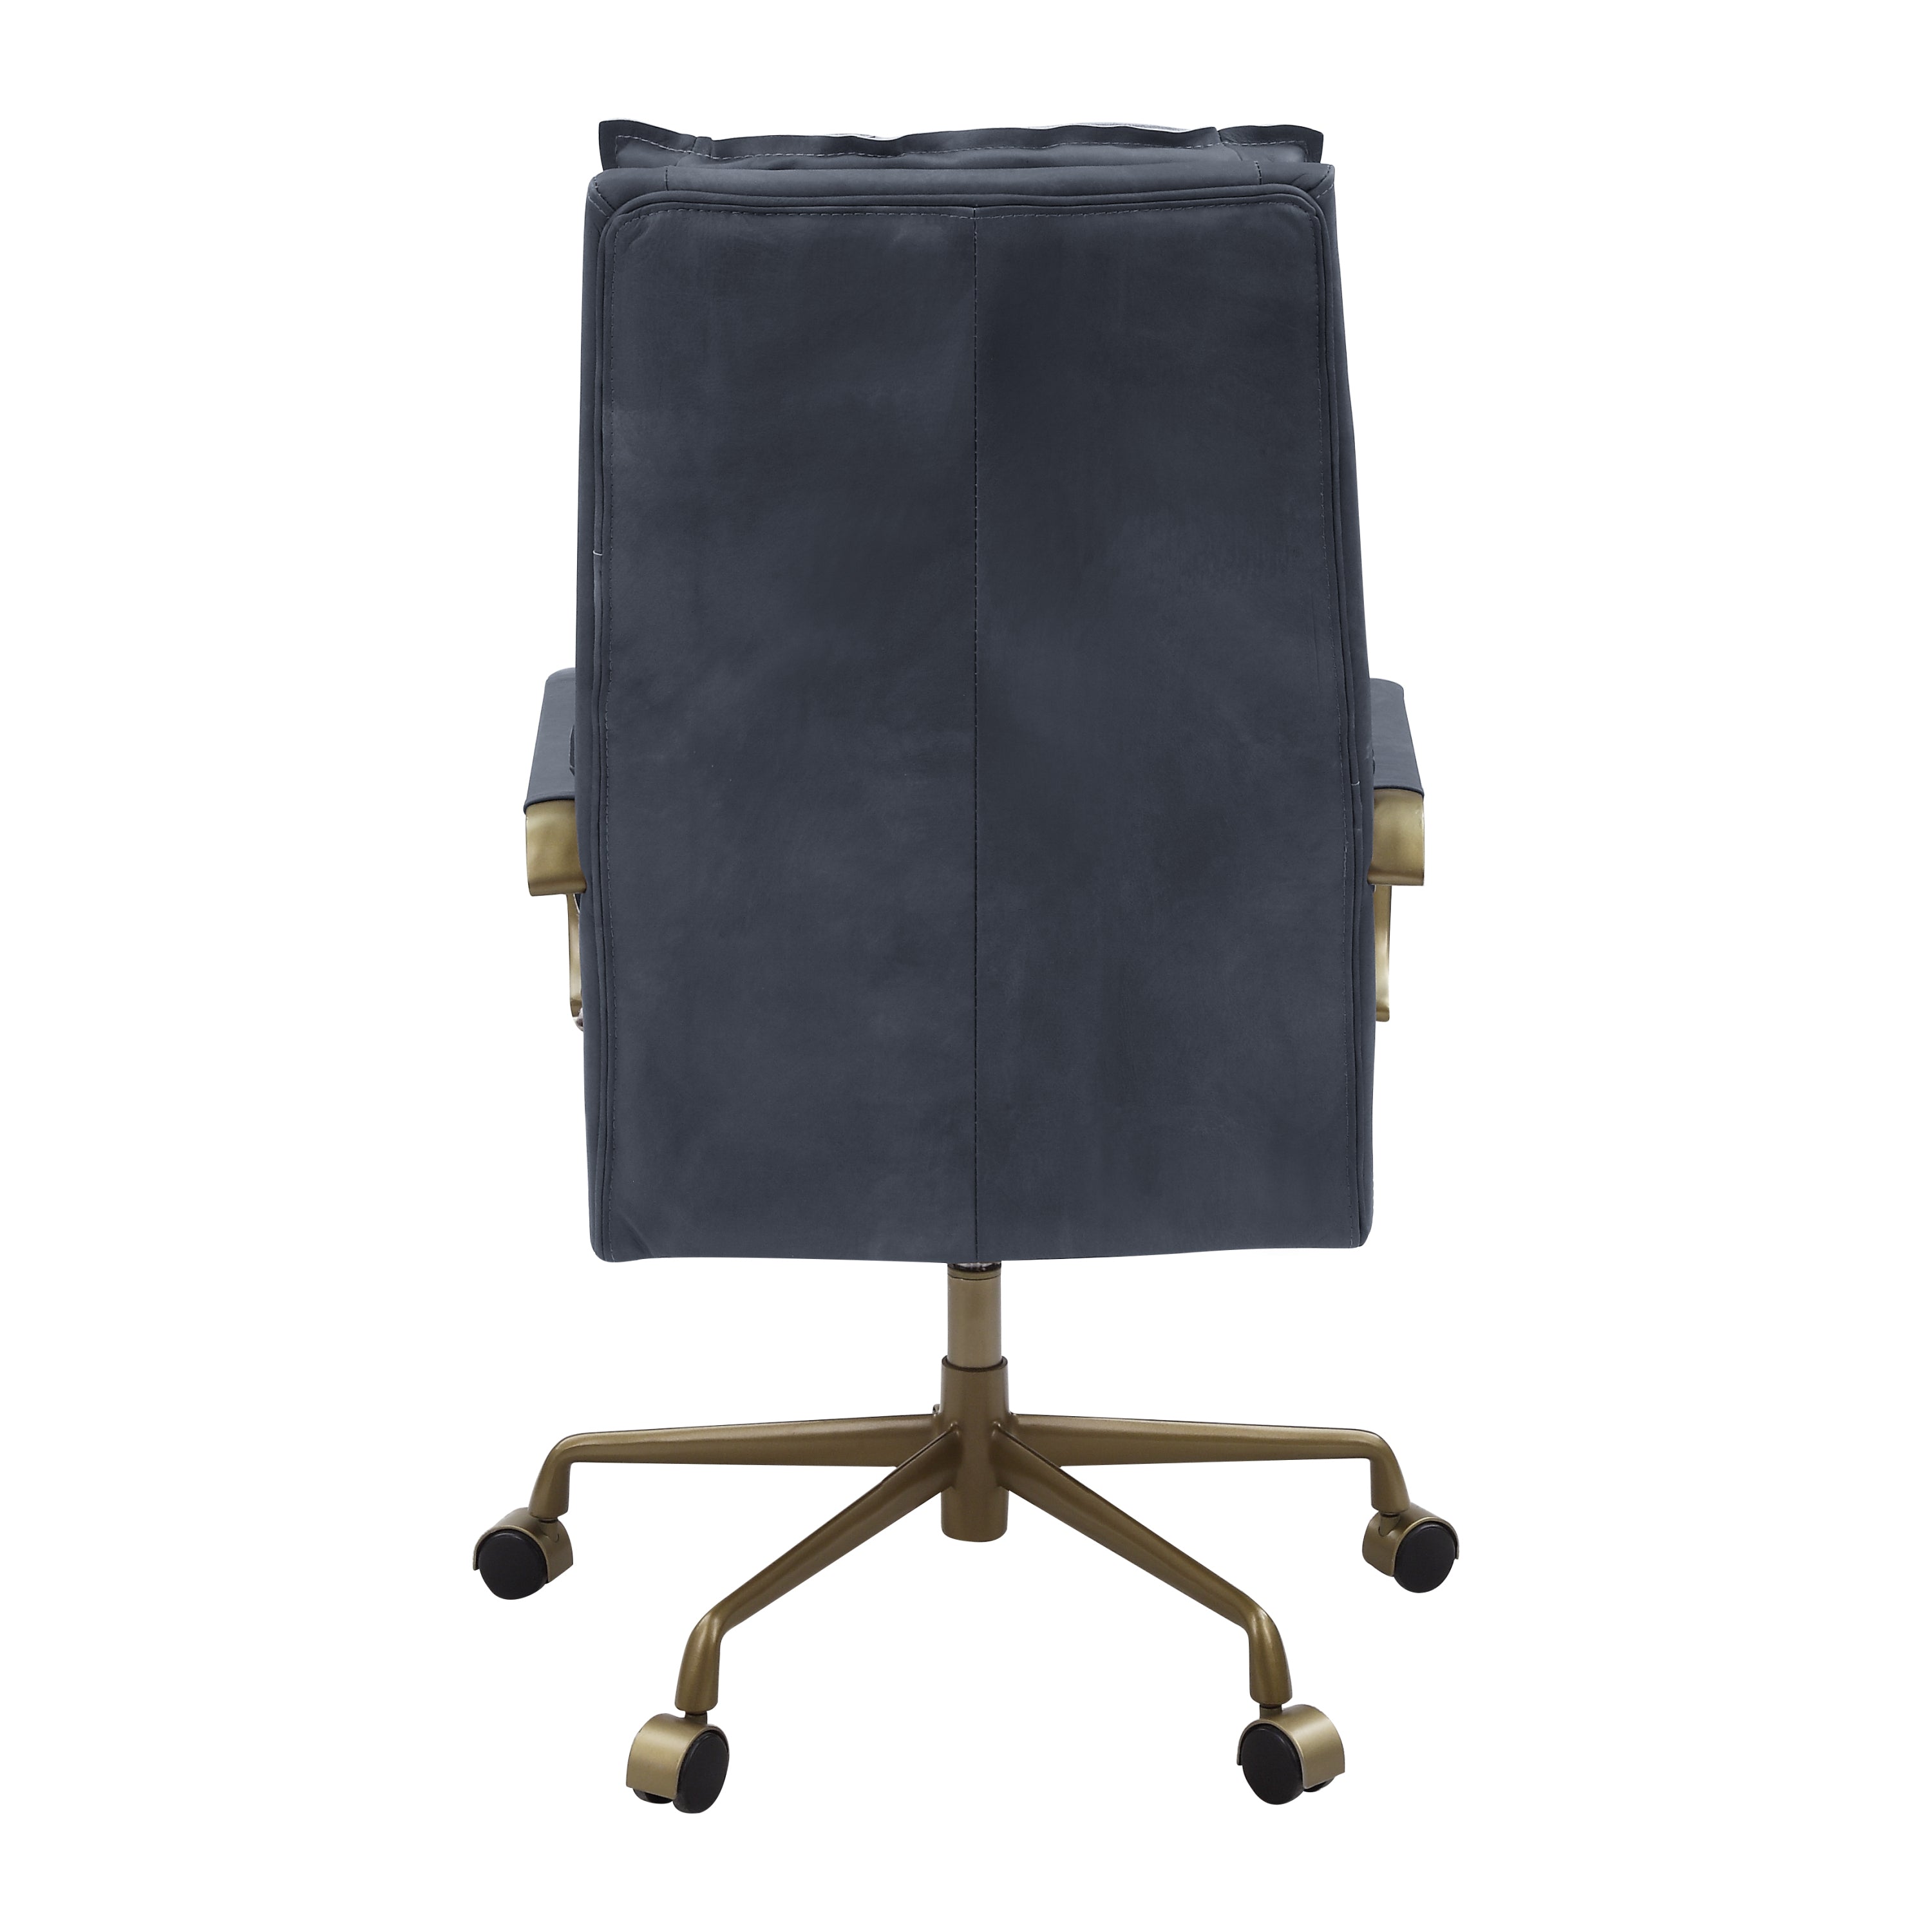 Executive Leather Office Chair - Grey